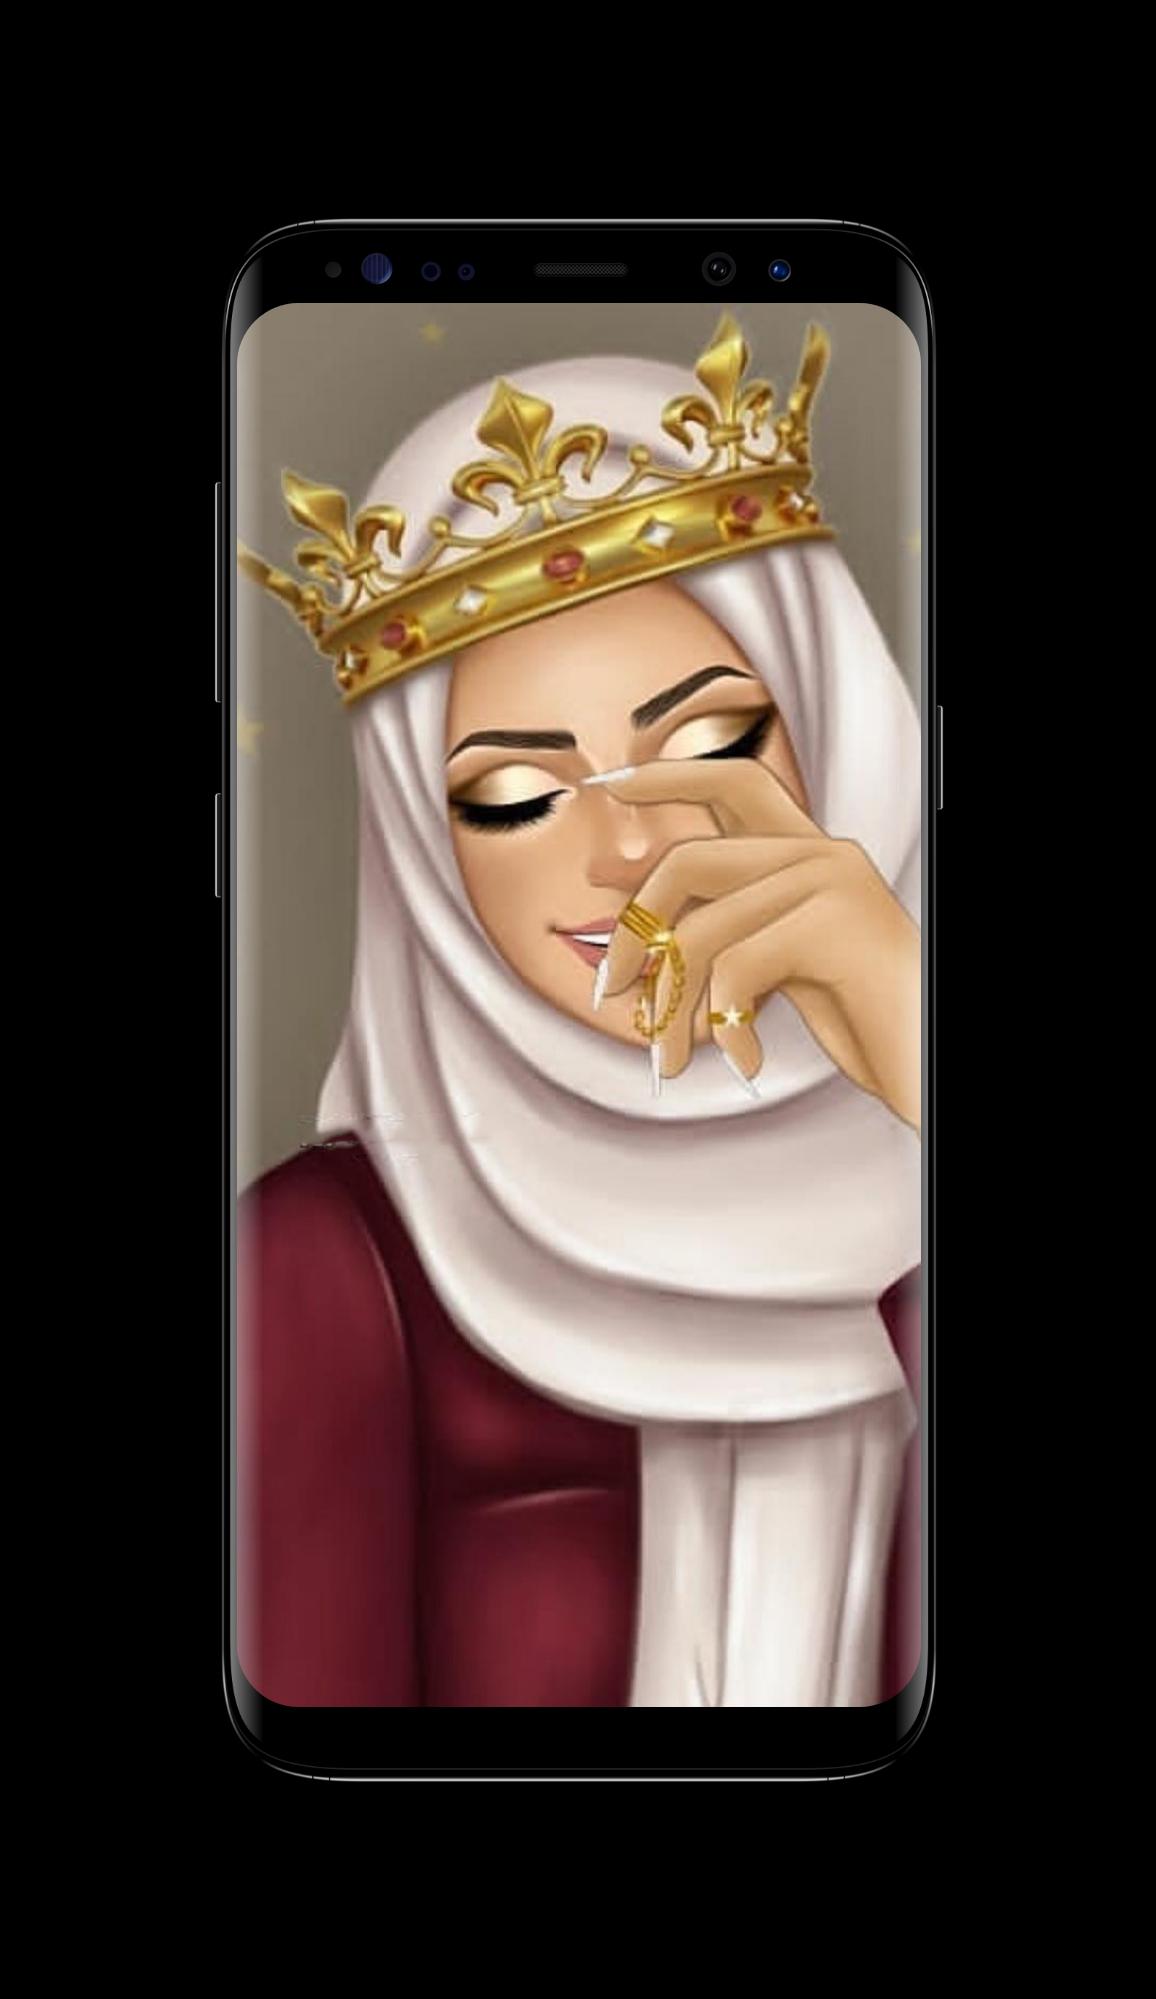 Hijab Muslimah Girly For Android Apk Download - hijab roblox gfx